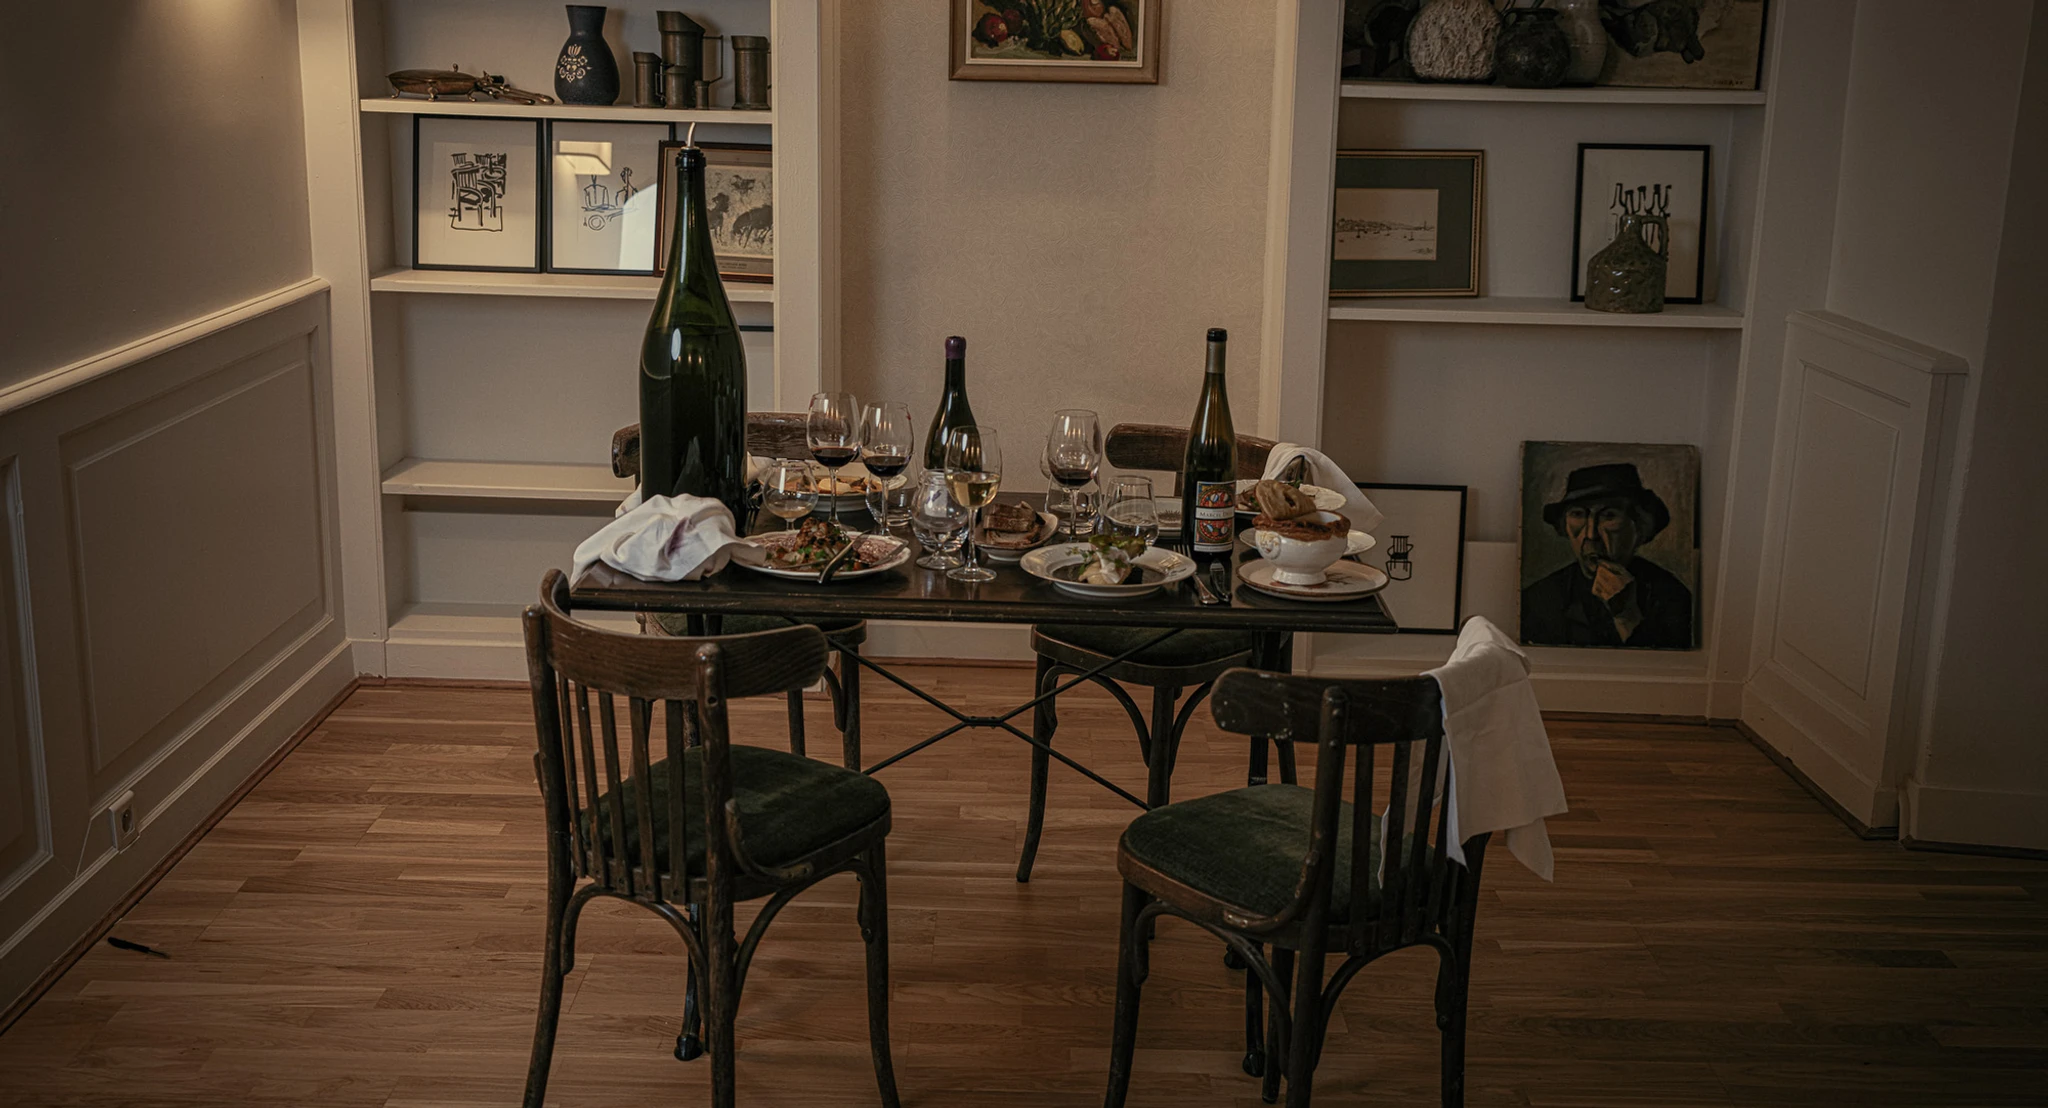 A rustic dining setup at Janine Restaurant, a French bistro in Paris, with a meal for two, multiple wine glasses, and artfully arranged wall shelves with various decorative items.